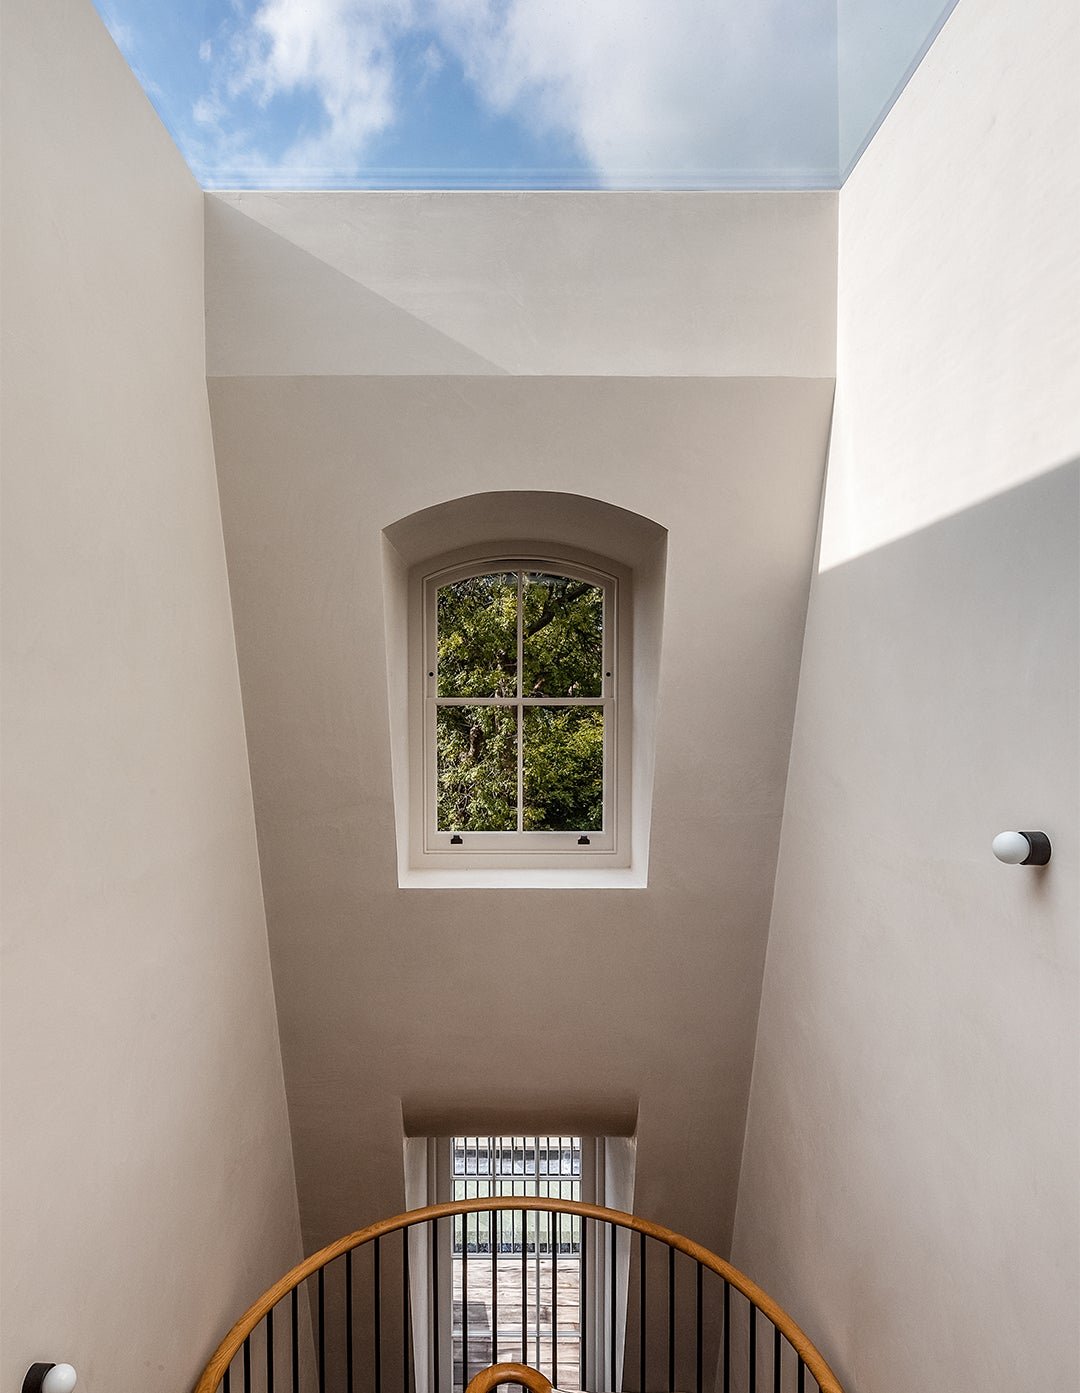 A Larger-Than-Life Skylight Fills This London Home’s 4 Floors With Sunshine